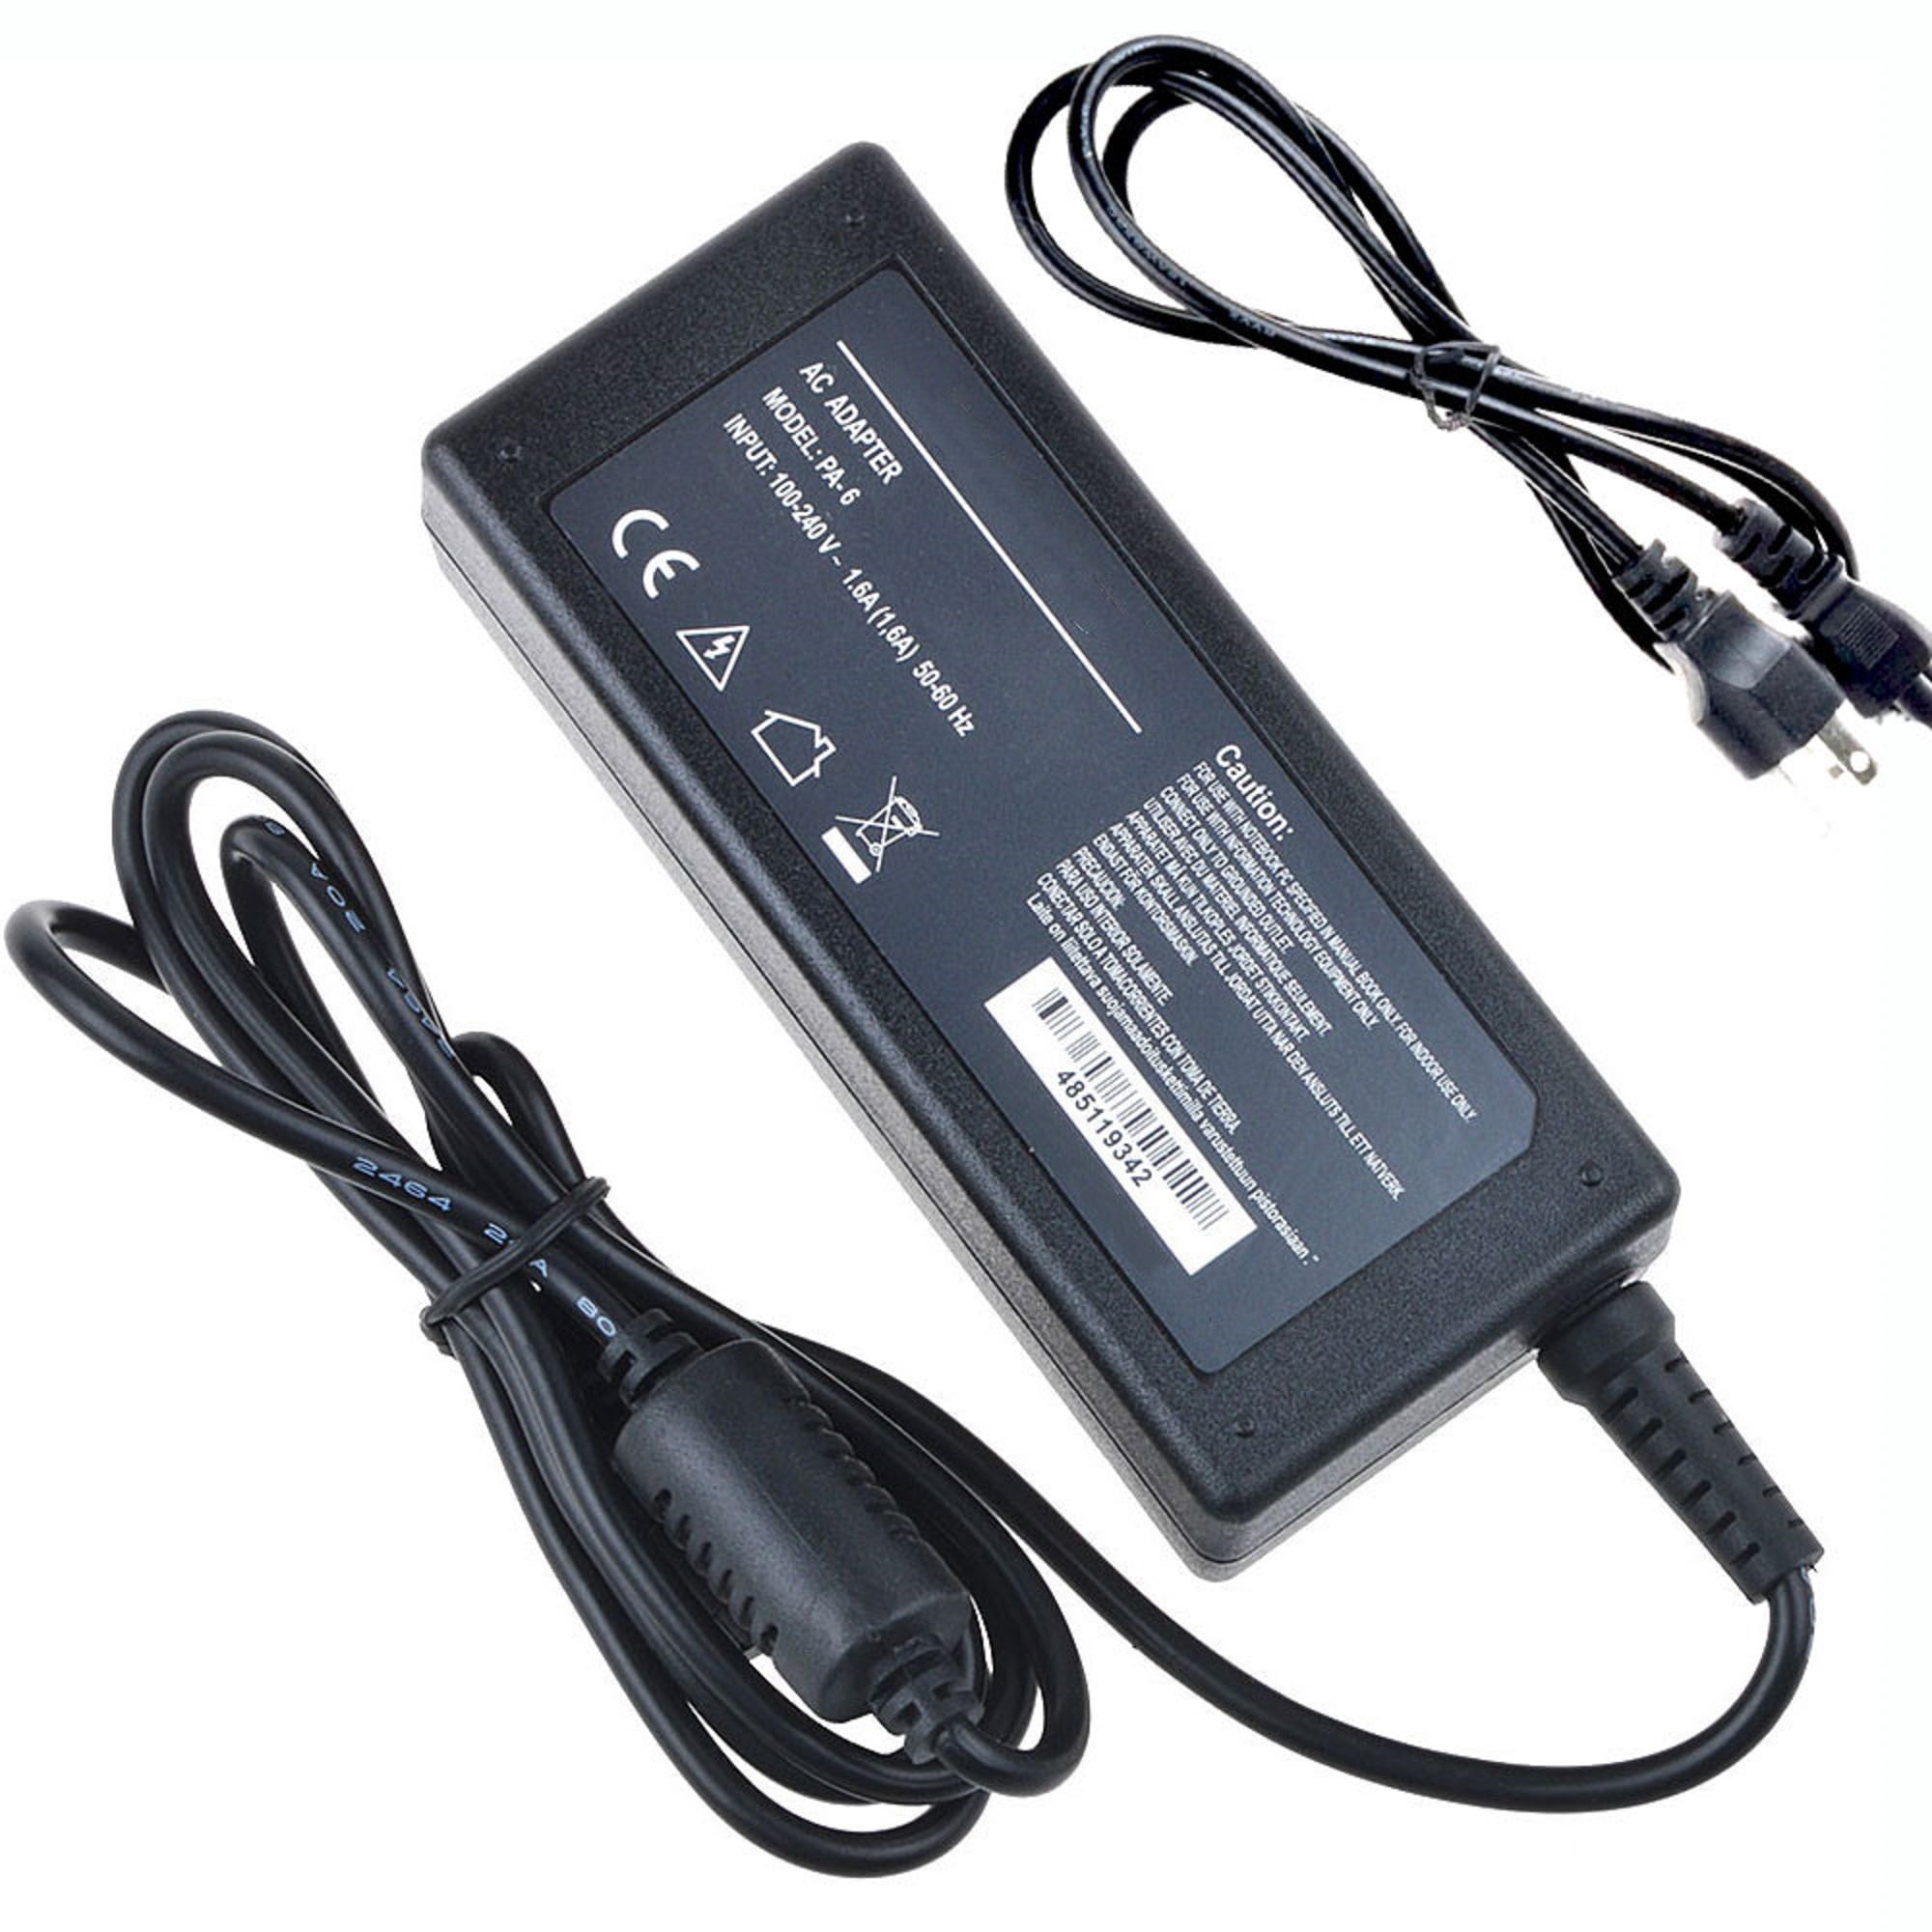 AC Adapter for Westinghouse LCM-19V1SL LED HDTV TV Charger Power Supply Cord PSU 